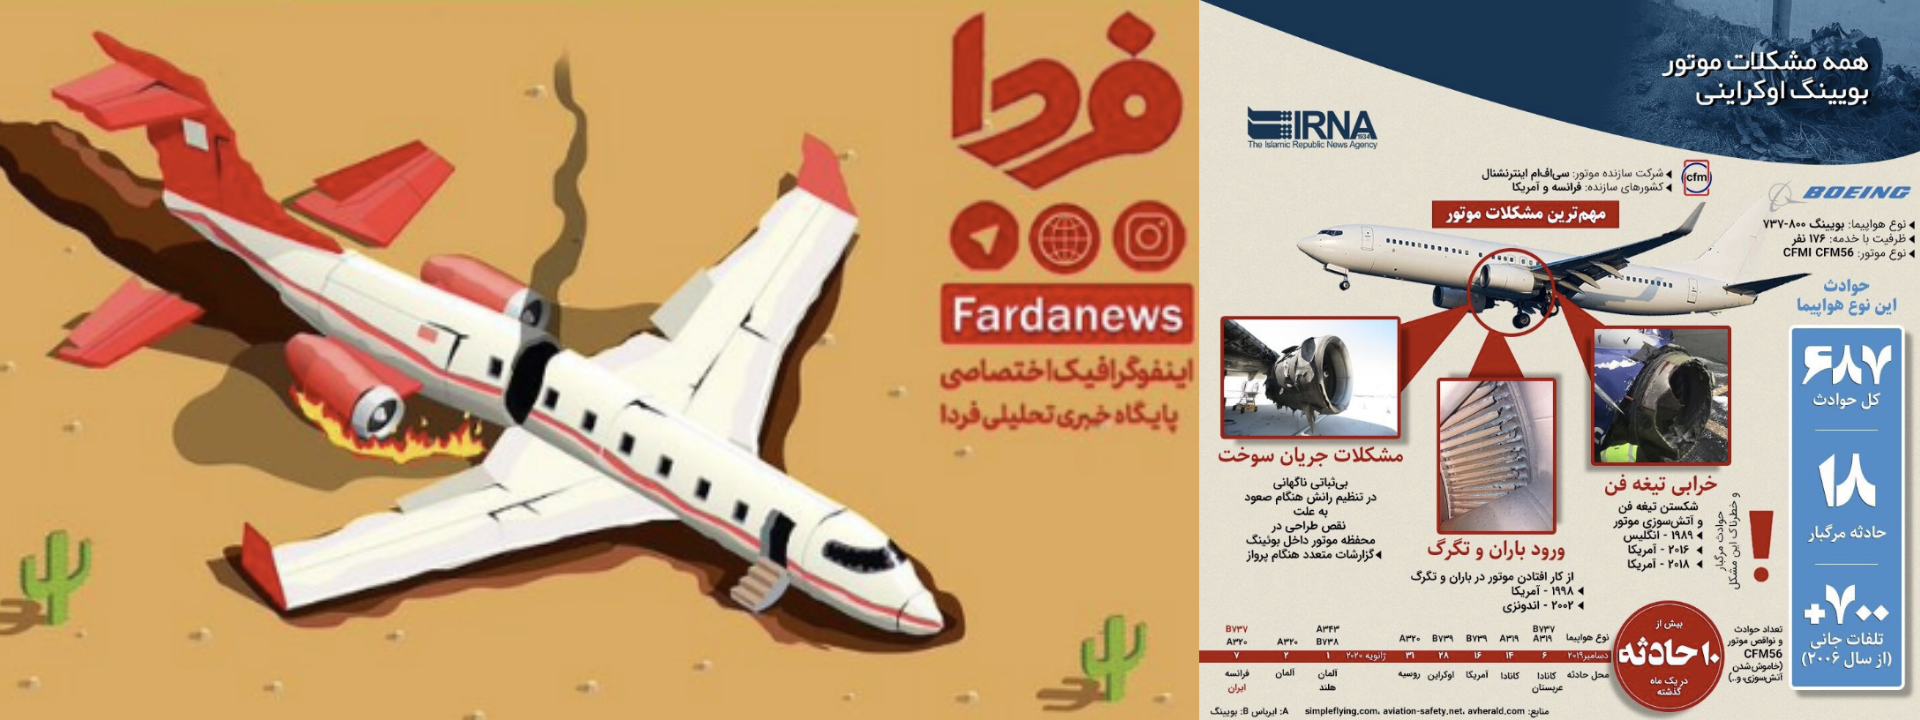 Denial, denial, confession: Iran could not avoid the truth about flight PS752